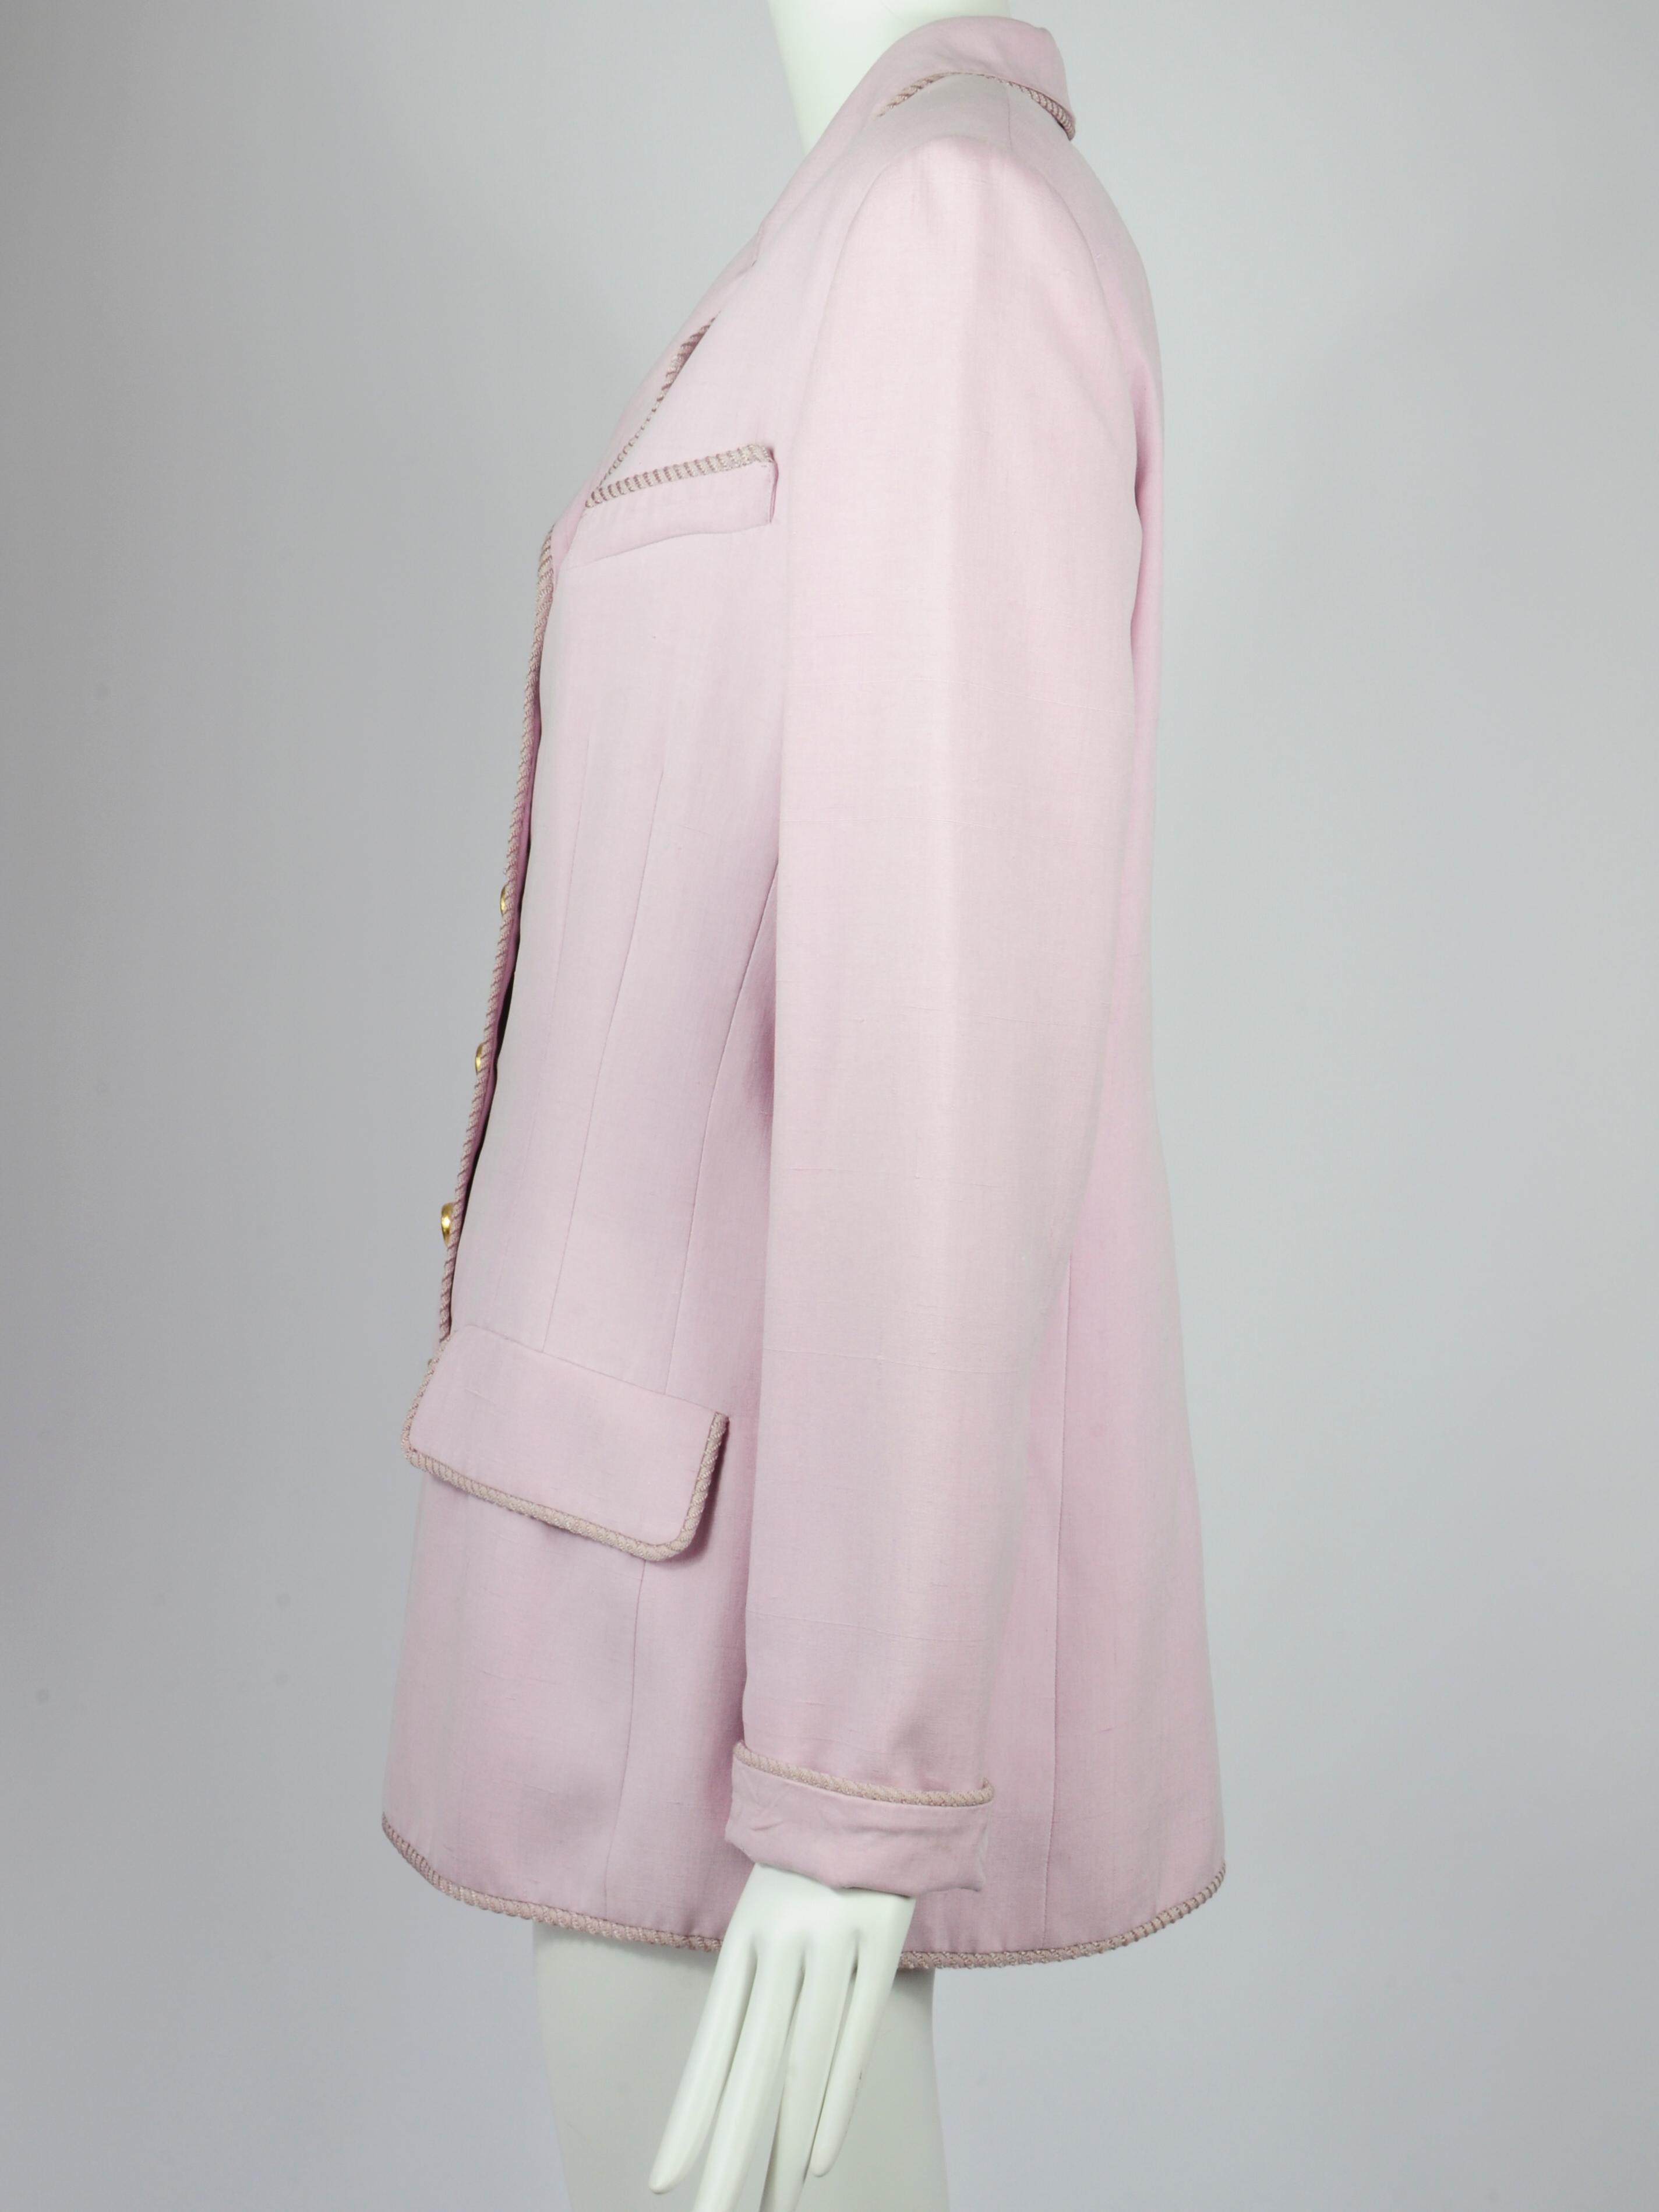 Valentino Miss V Silk Lilac Blazer Jacket with Golden Buttons 1990s  1